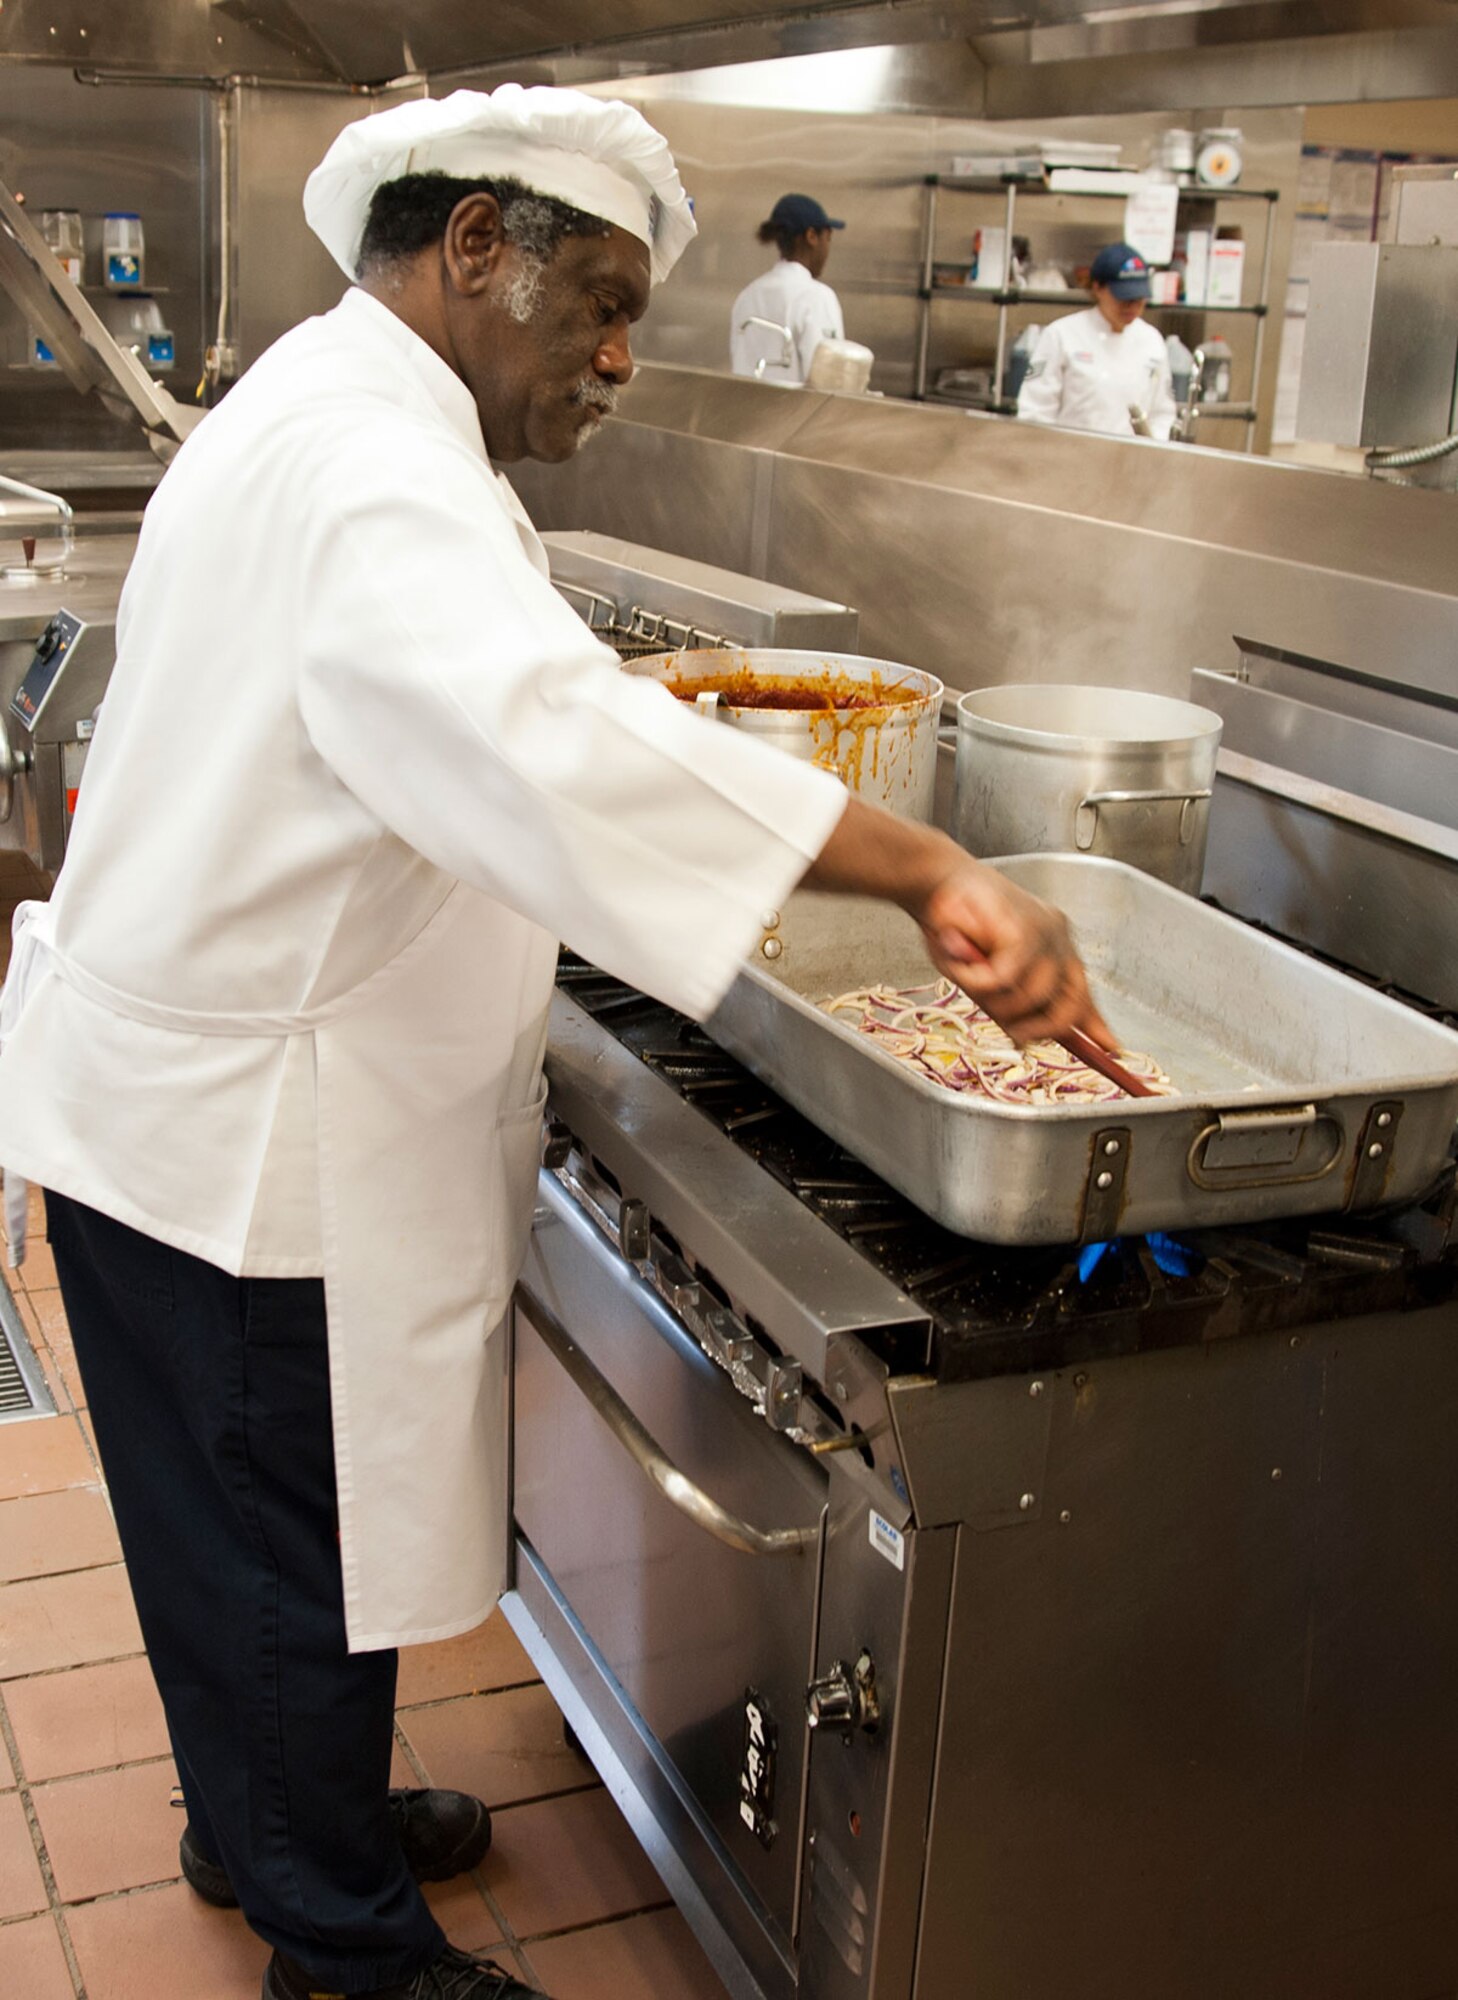 Robert Fowlkes, a 673rd Force Support Squadron food service chef, prepares a dish for dinner at the Iditarod Dining Facility on Joint Base Elmendorf-Richardson, Alaska, March 18, 2015. The 673rd FSS earned the Air Force Curtis E. LeMay award for best large installation-level FSS of the year in the Air Force for 2014. (U.S. Air Force photo/Airman 1st Class Tammie Ramsouer)